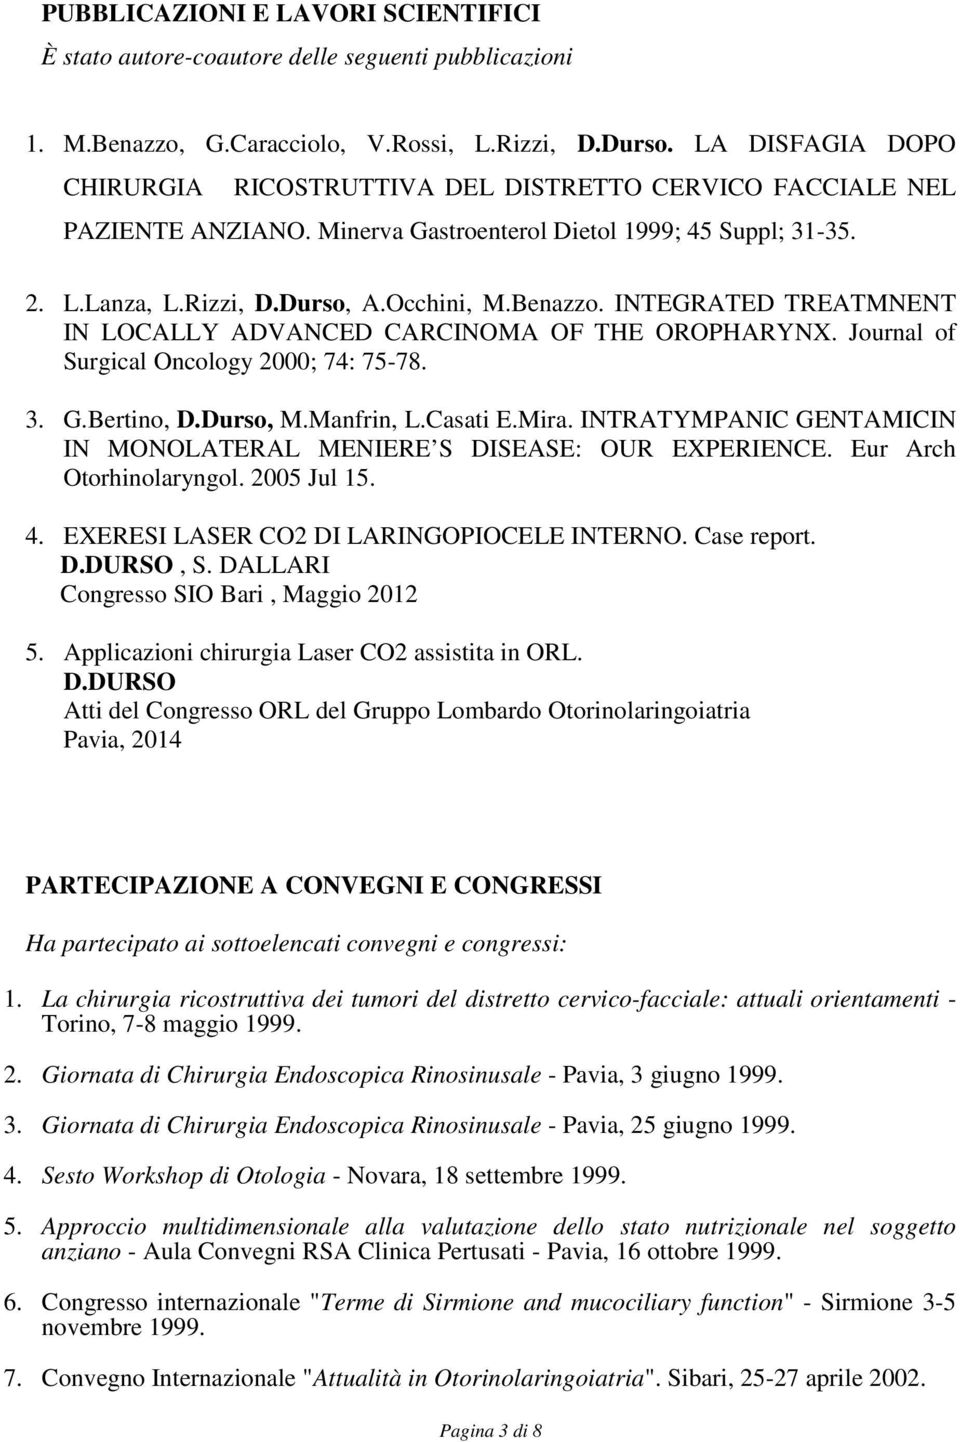 INTEGRATED TREATMNENT IN LOCALLY ADVANCED CARCINOMA OF THE OROPHARYNX. Journal of Surgical Oncology 2000; 74: 75-78. 3. G.Bertino, D.Durso, M.Manfrin, L.Casati E.Mira.